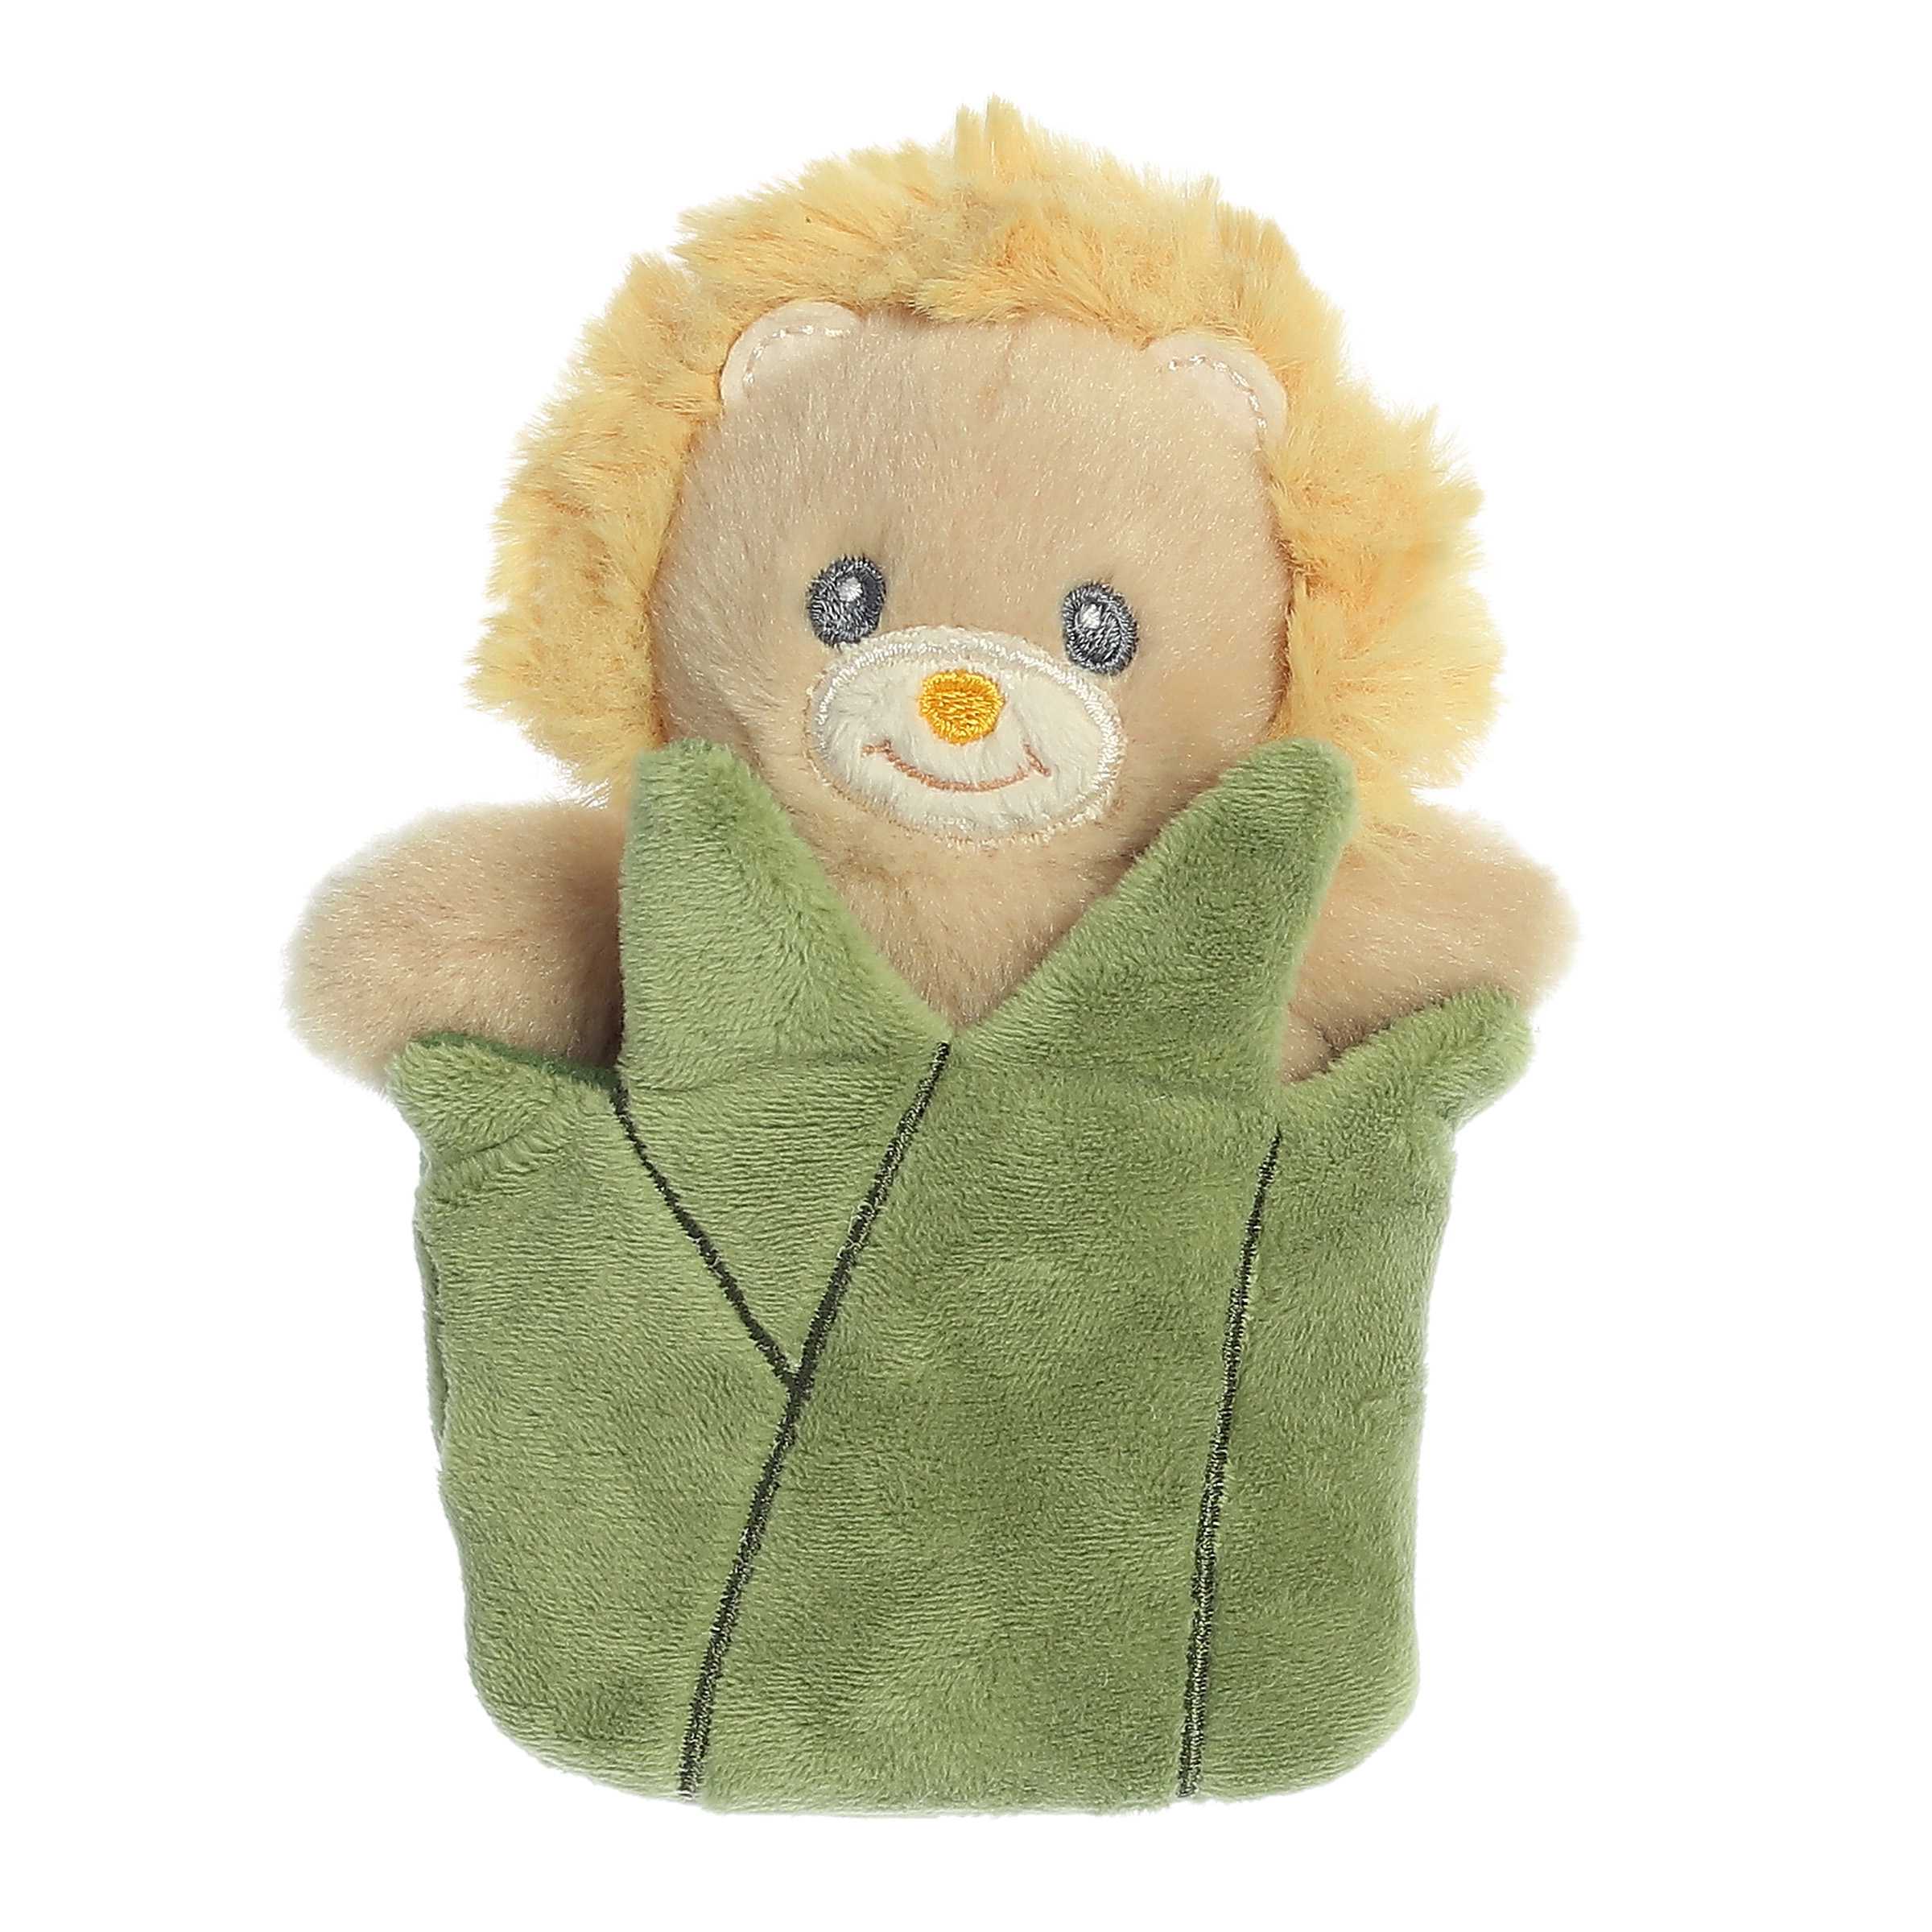 Adorable tan lion stuffed animal with yellow fur and smiling face sitting inside a detachable green bush pocket